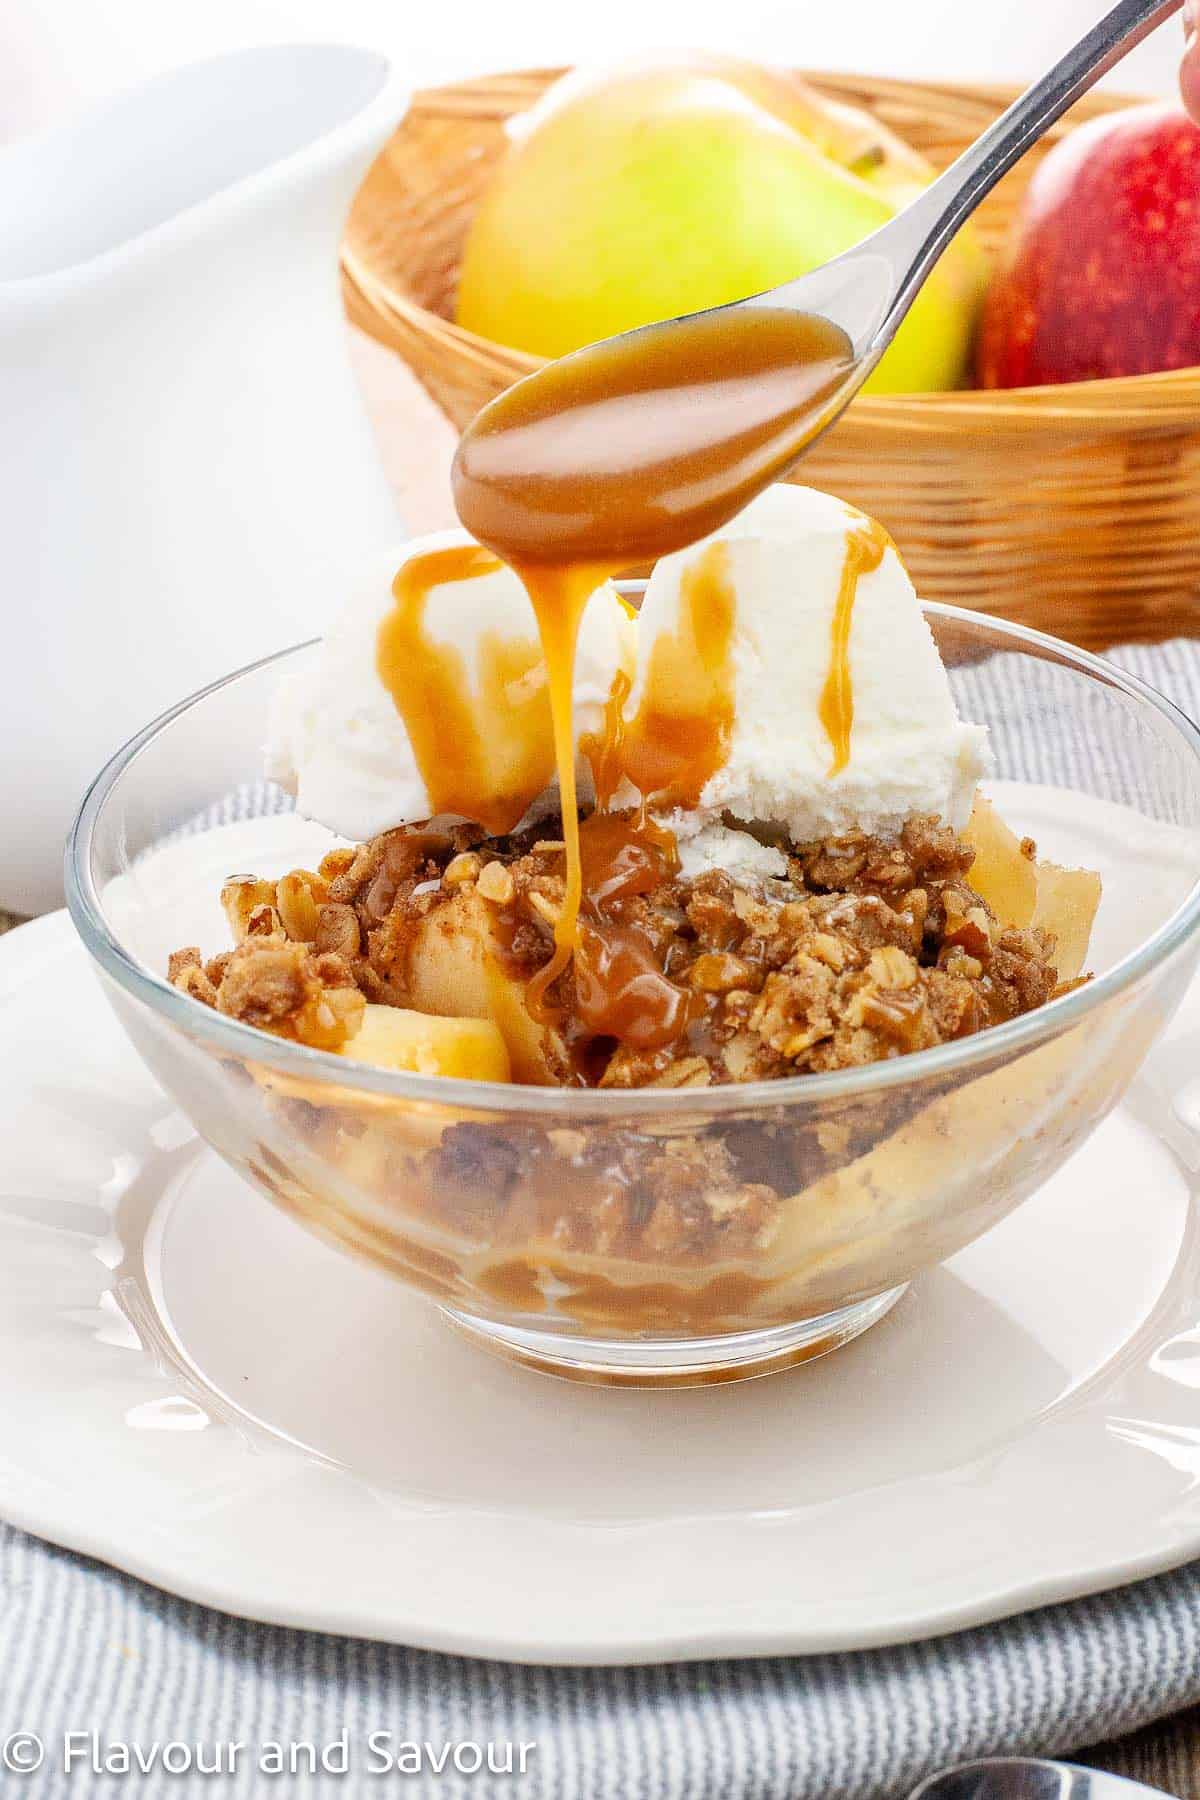 Drizzling caramel sauce from a spoon on a bowl of apple pecan crisp.